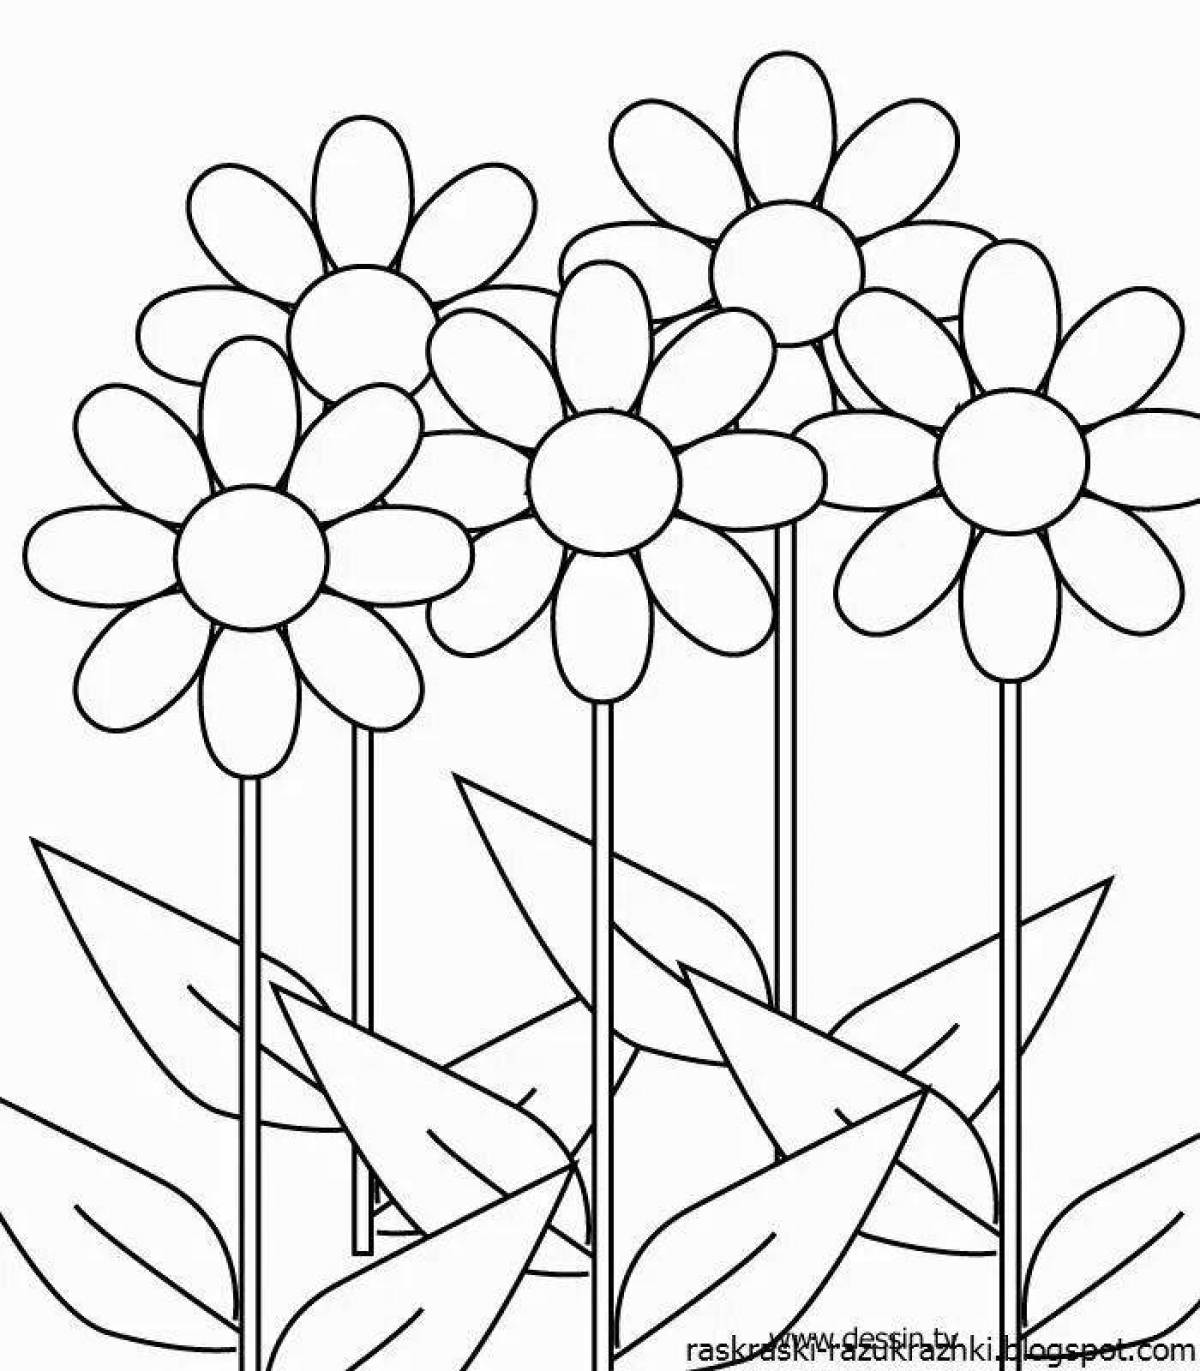 Flashing coloring page colors